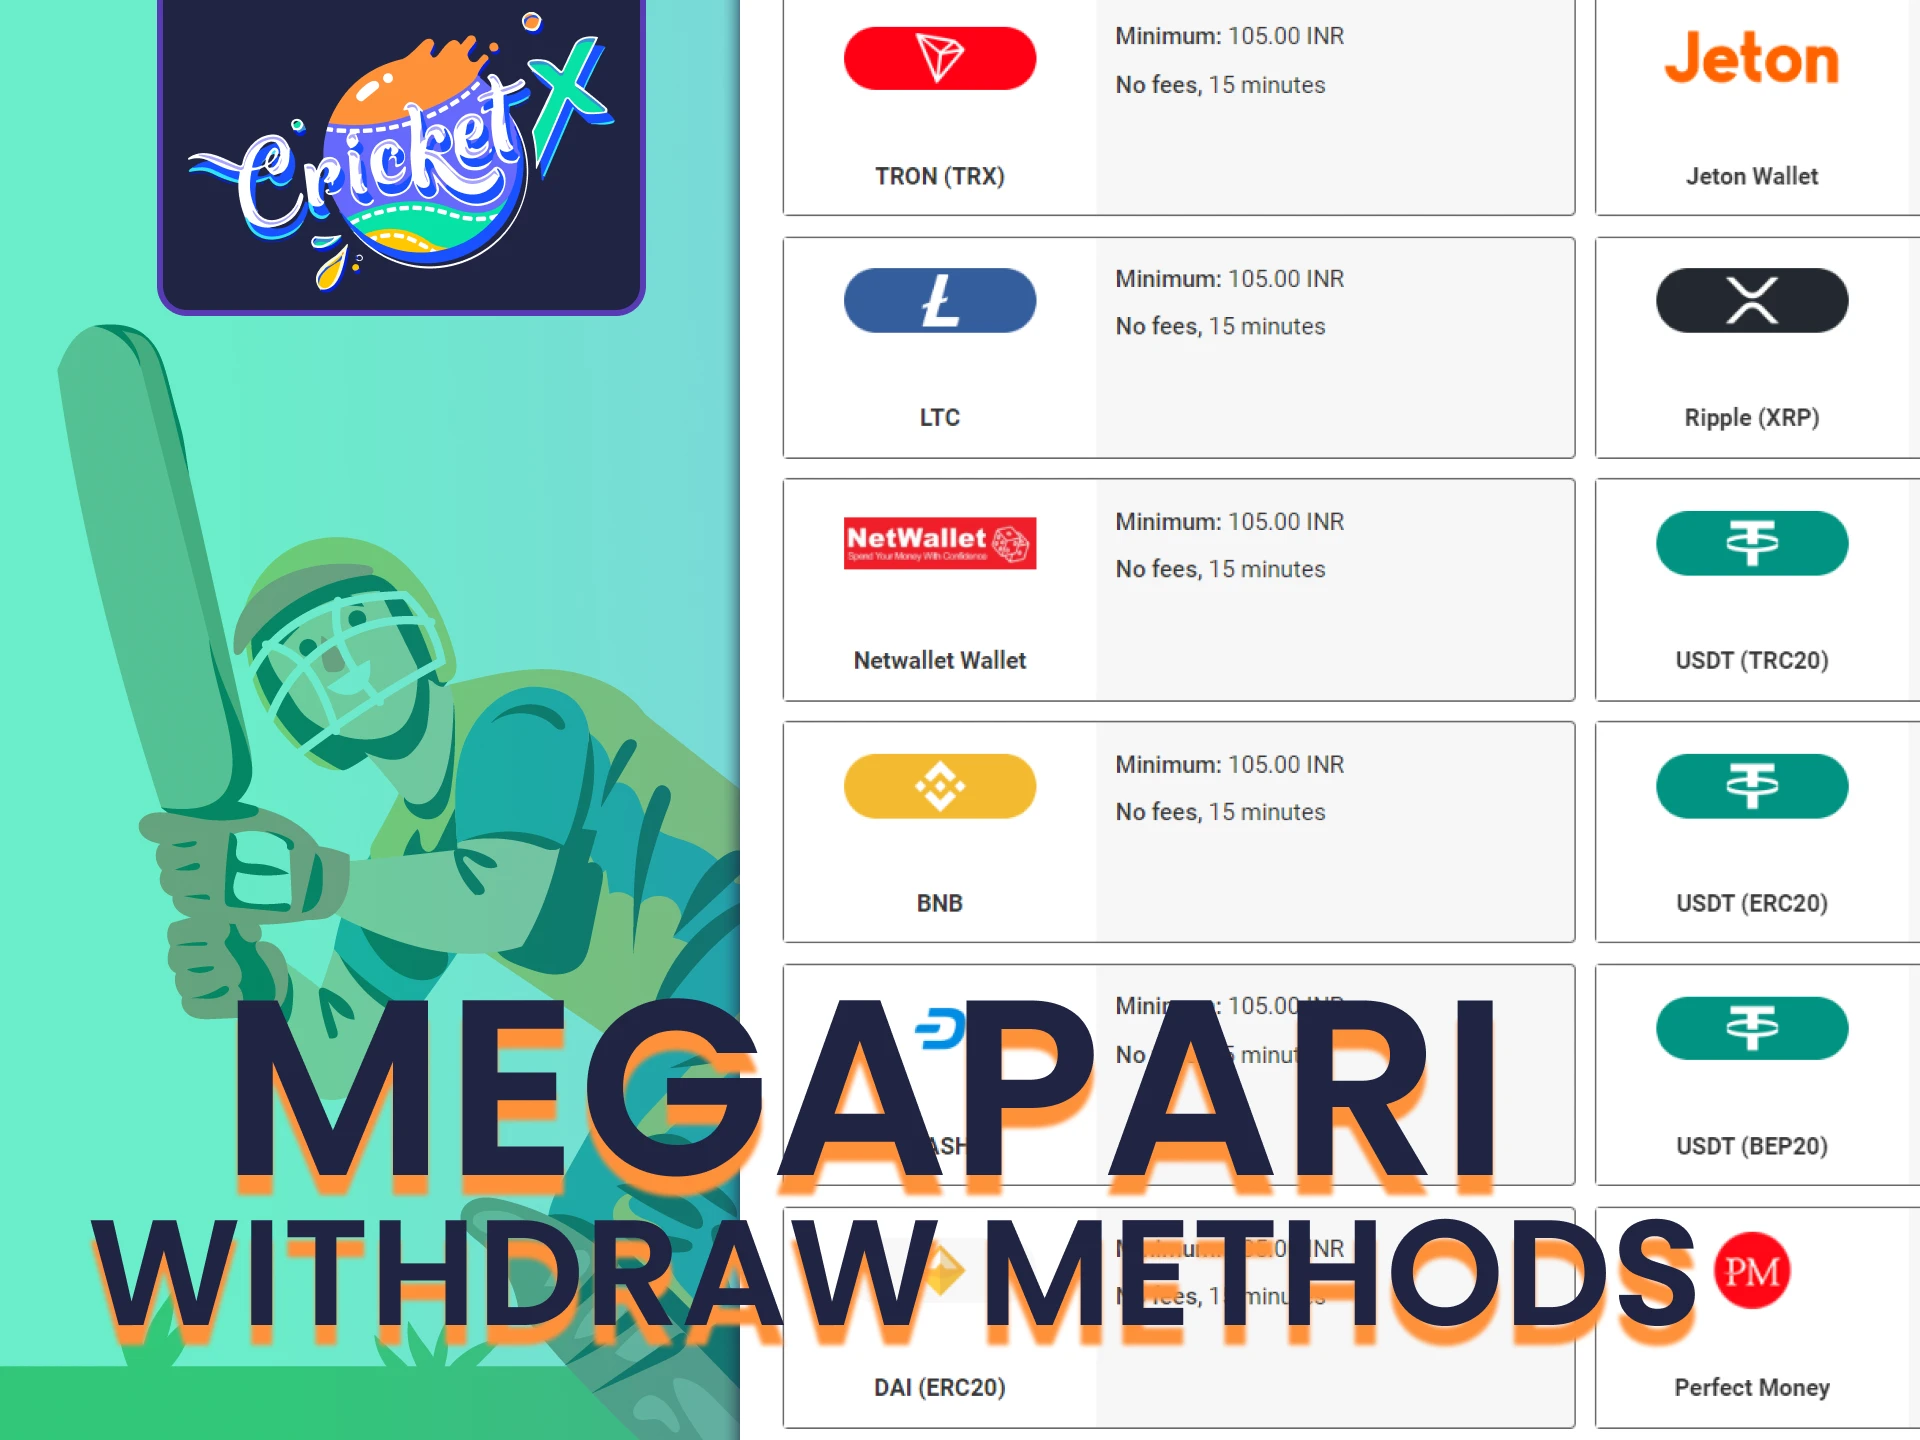 Withdraw funds after winning on Megapari.